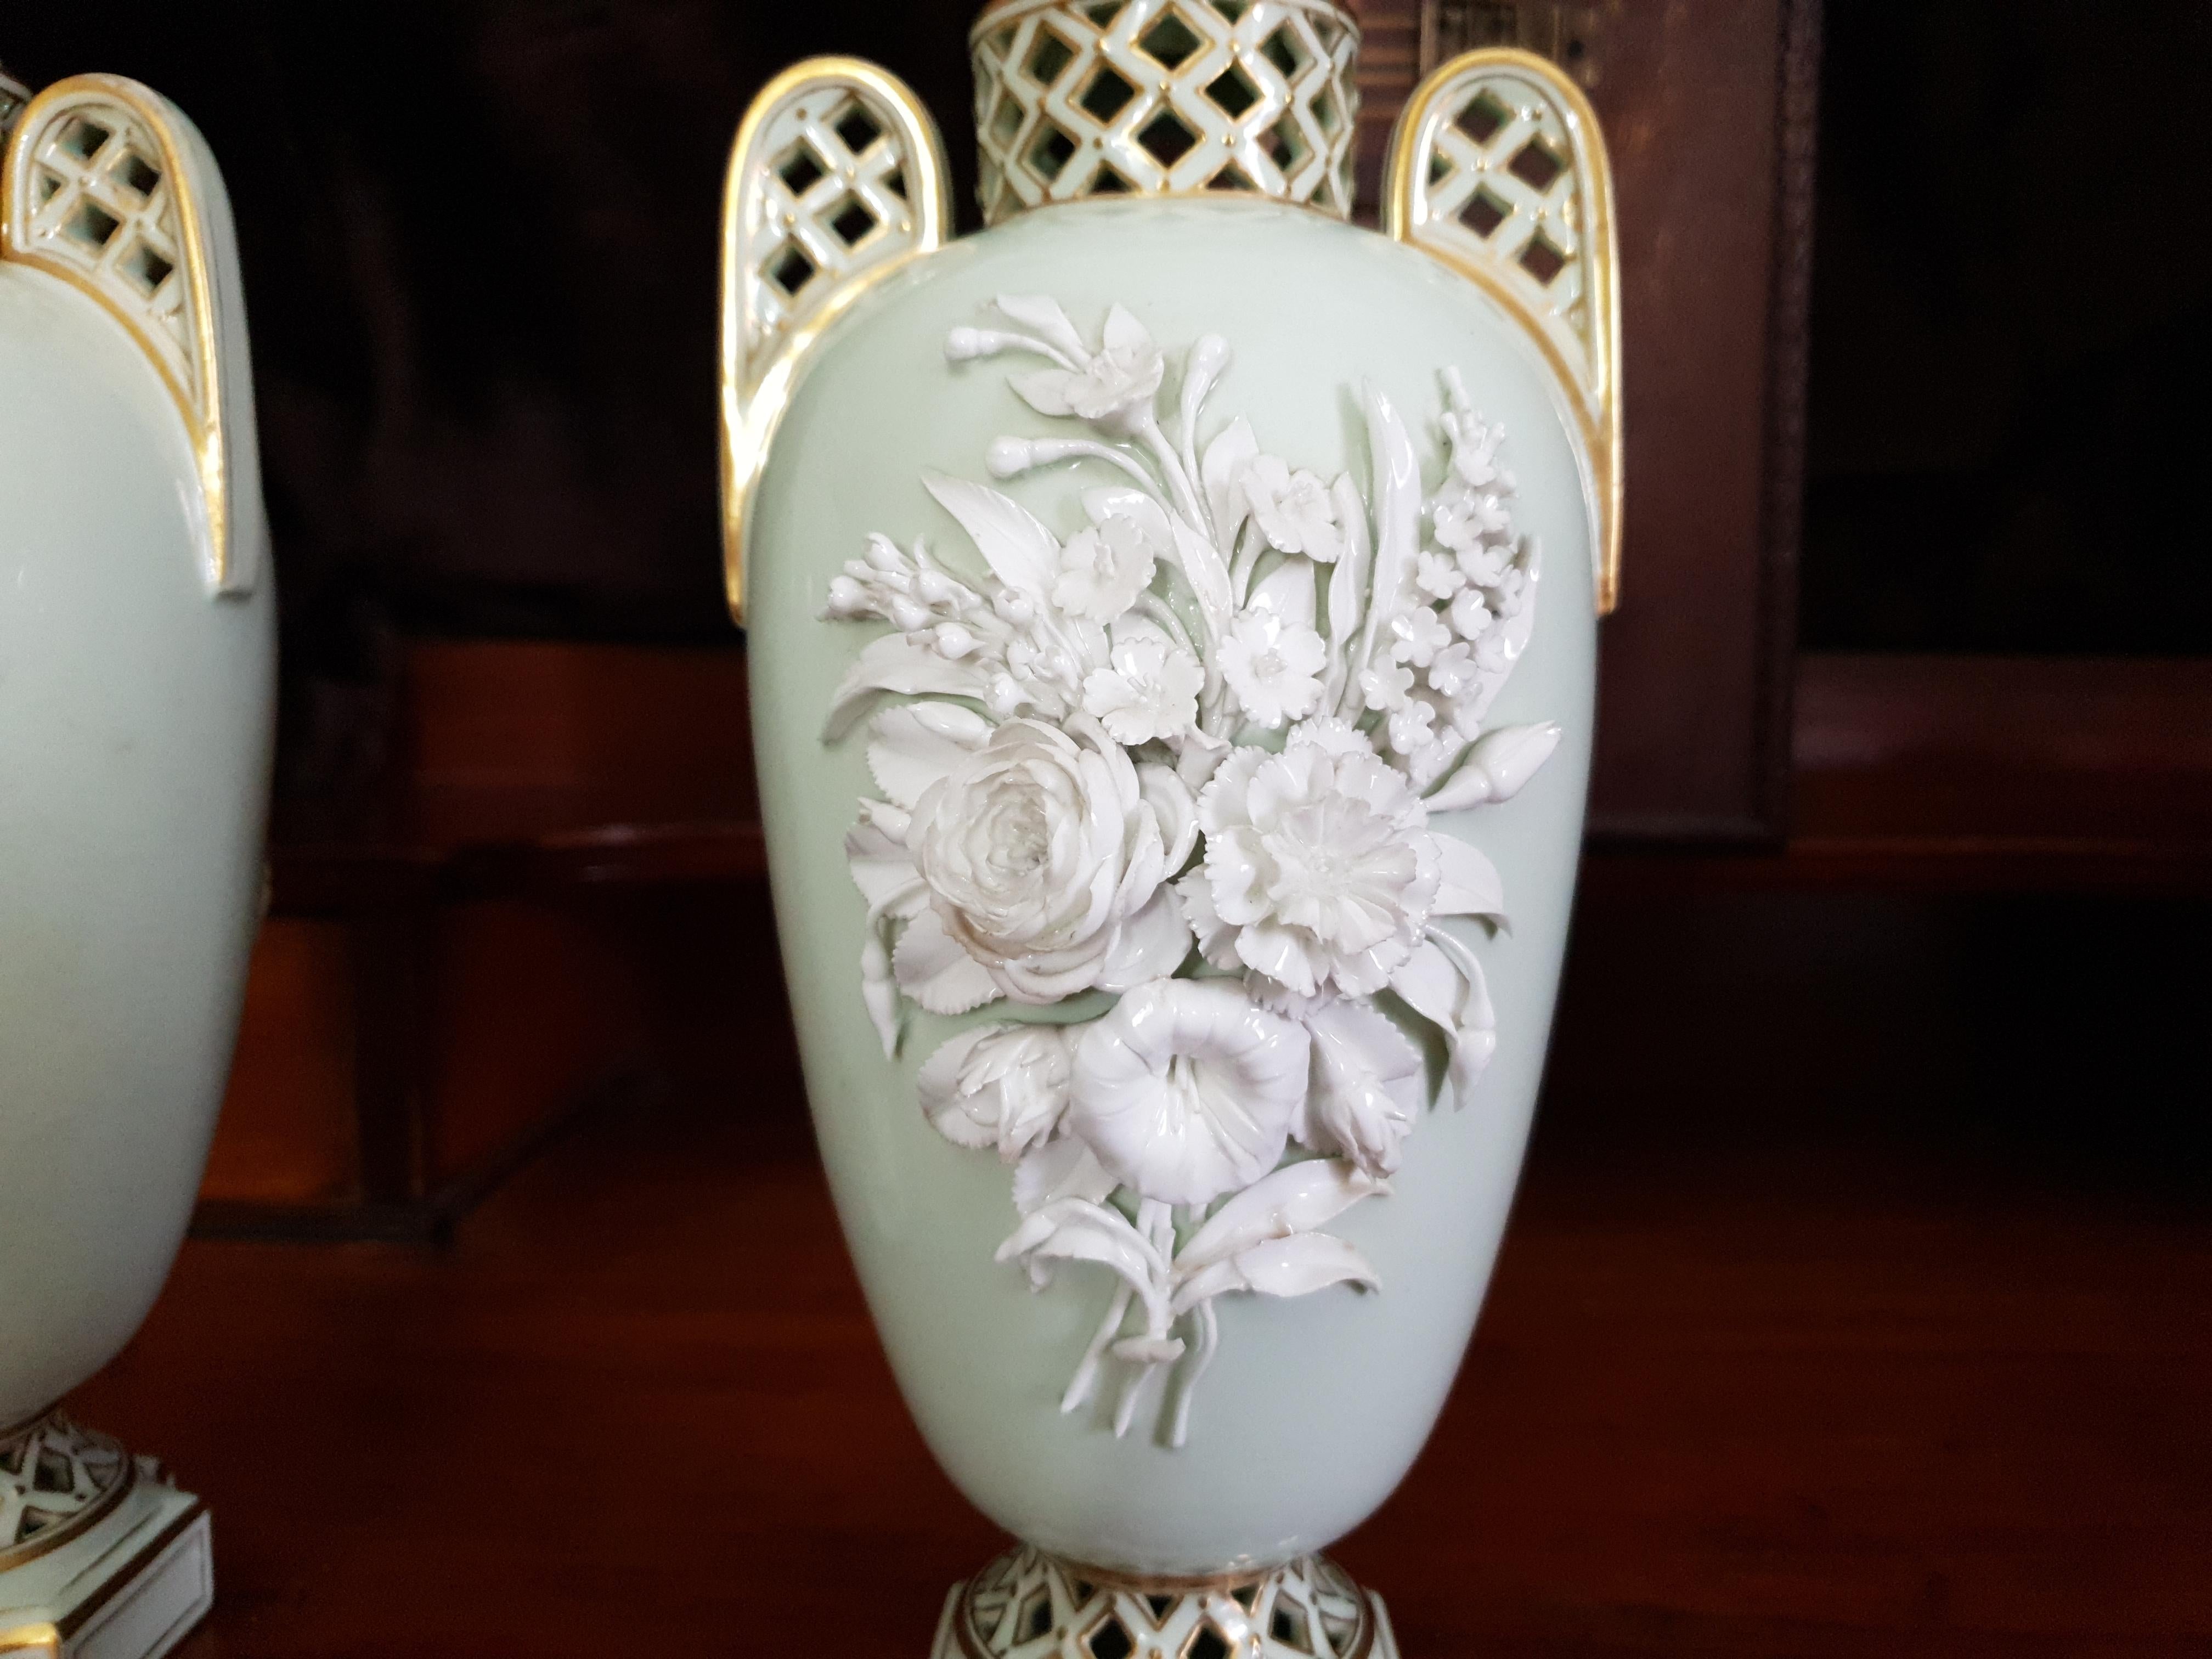 Mint Green 19th Century William Brownfield Encrusted Reticulated Floral Vases For Sale 3